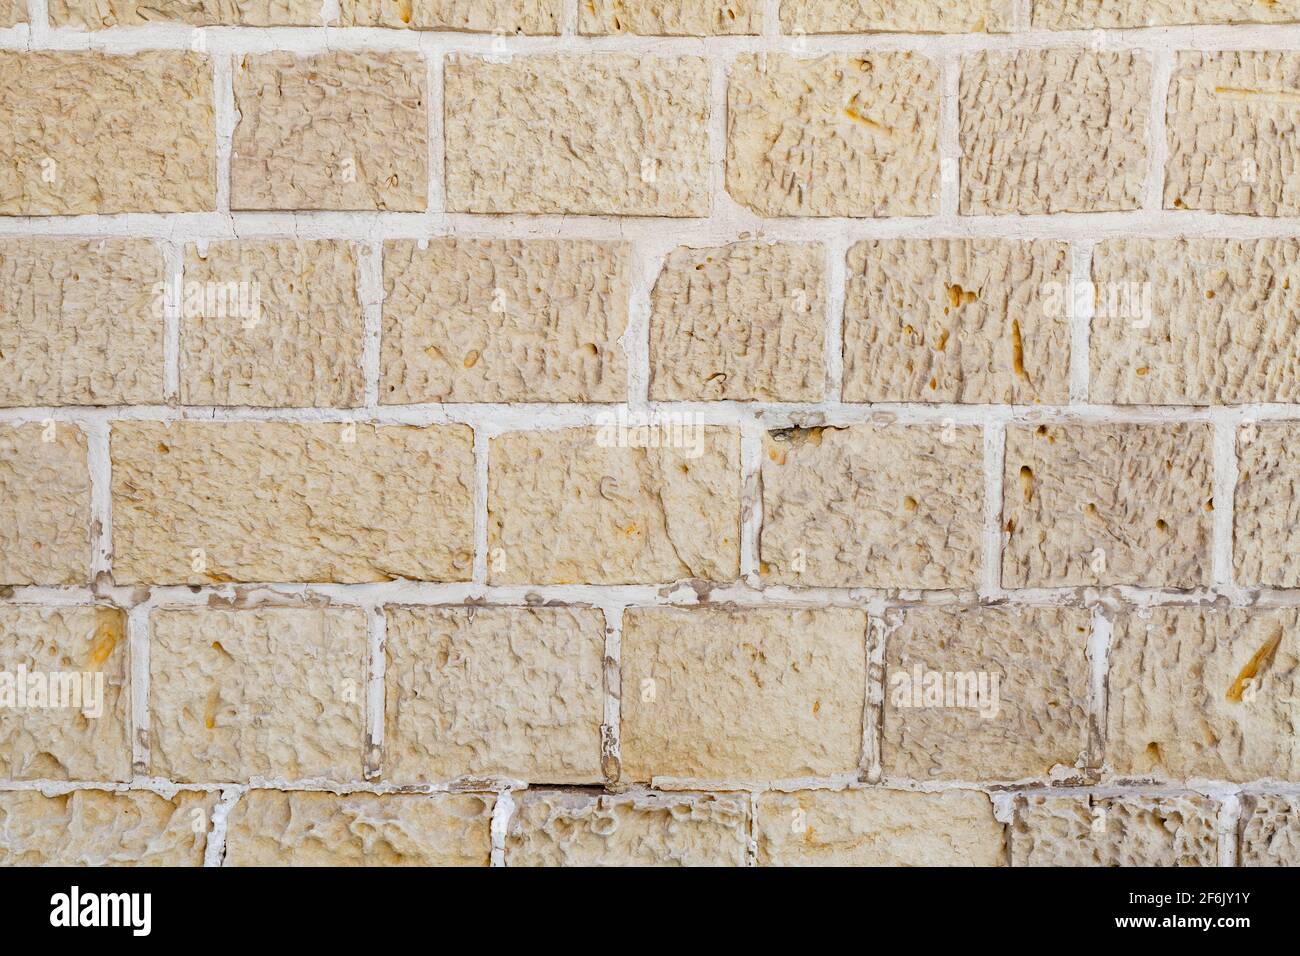 Old wall made of yellow sandstone bricks, closeup background photo texture Stock Photo